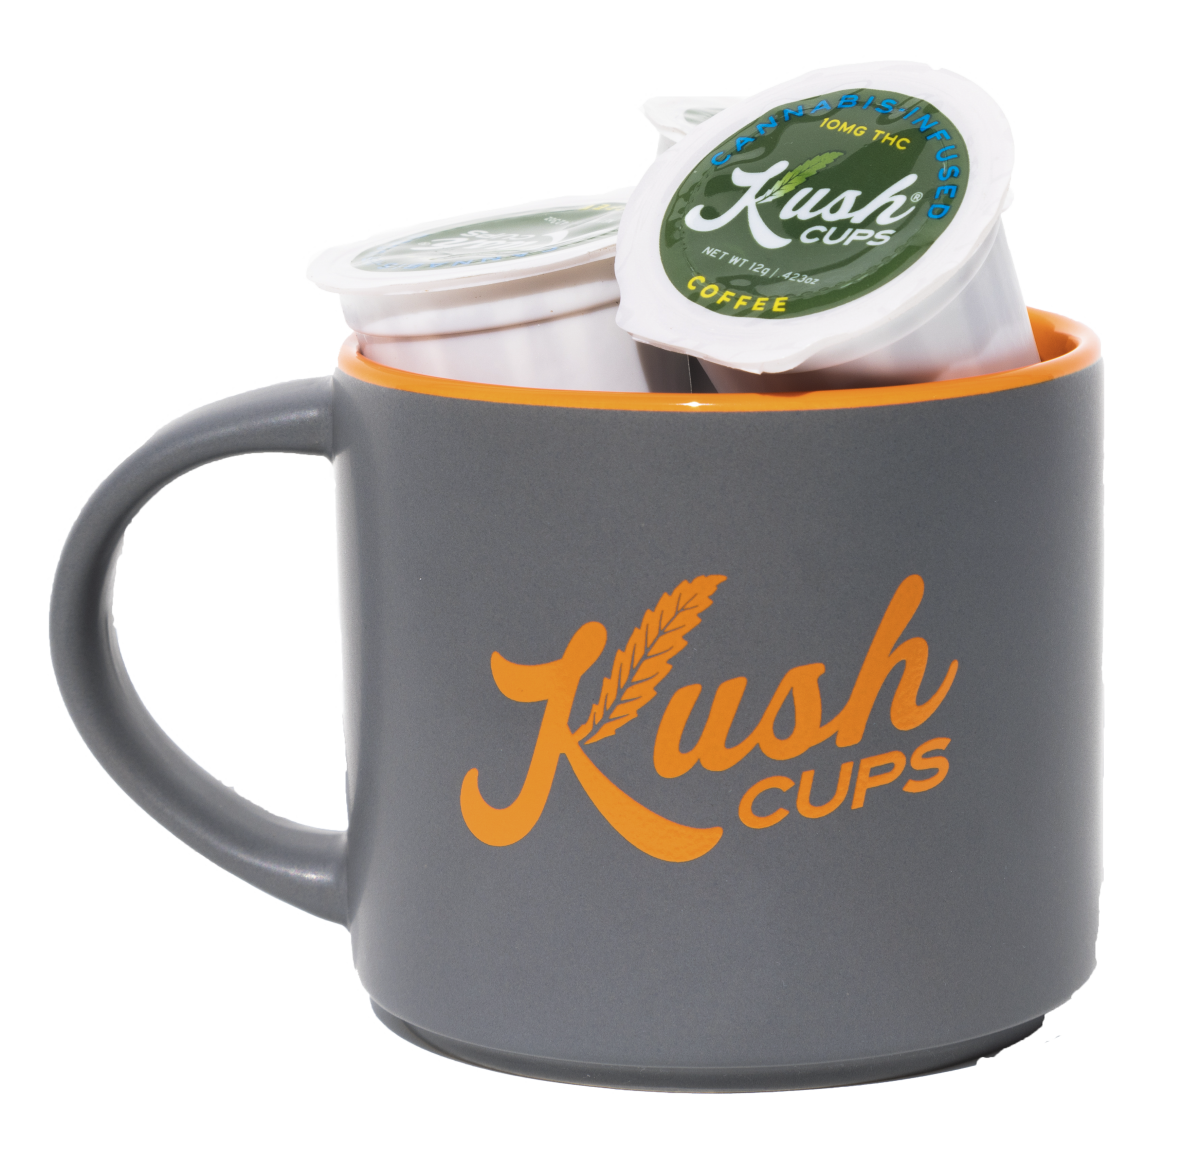 A coffee mug with the name Kush Cups on it filled with two K-Cup coffee pods.